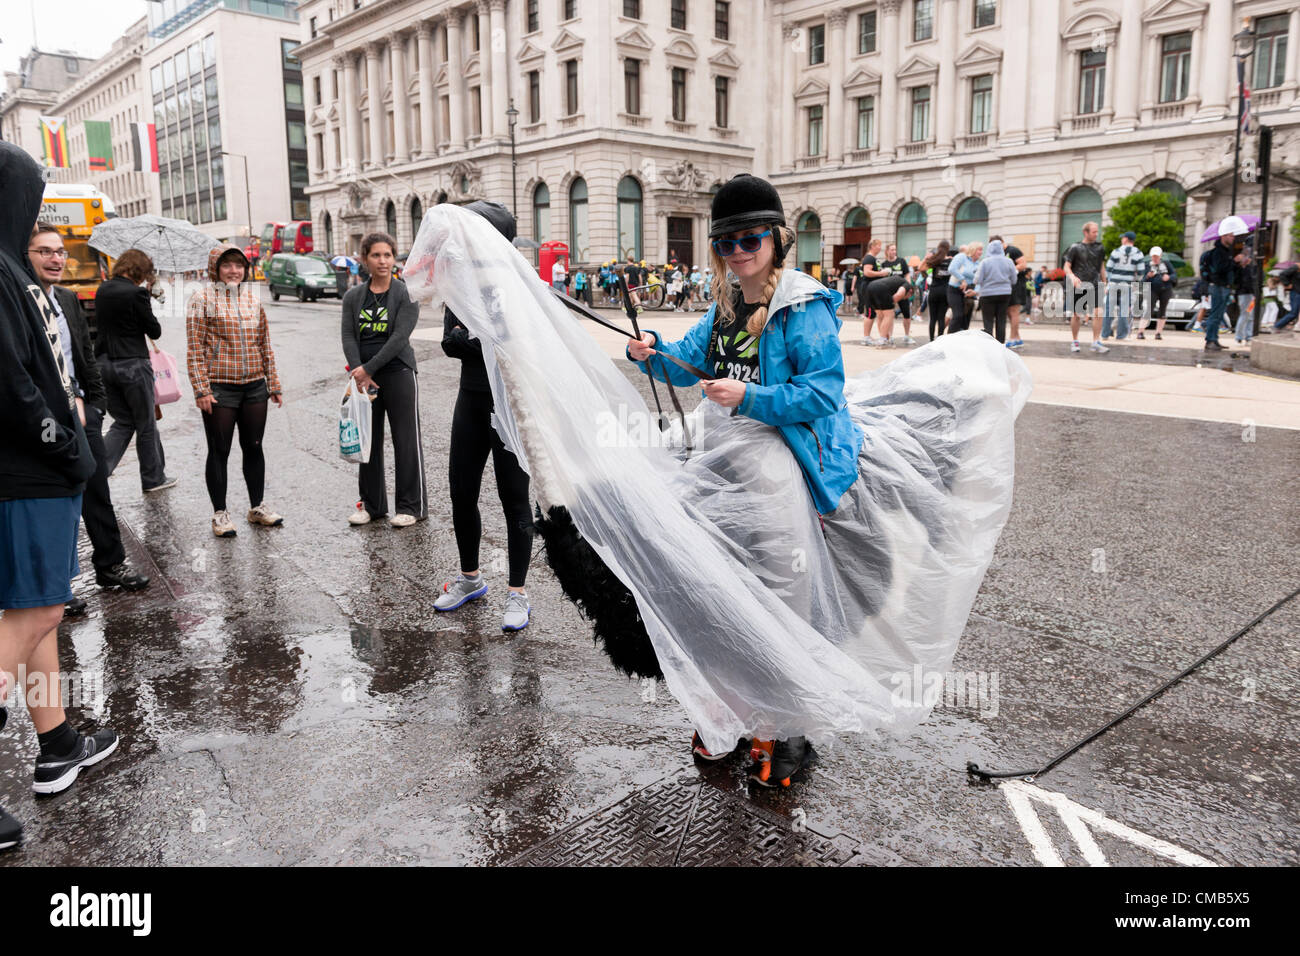 Runner of the Nike sponsored 2012 British 10K run in a ostridge costume  before the race, in Waterloo Place, London, UK, on the 8th of July 2012  Stock Photo - Alamy